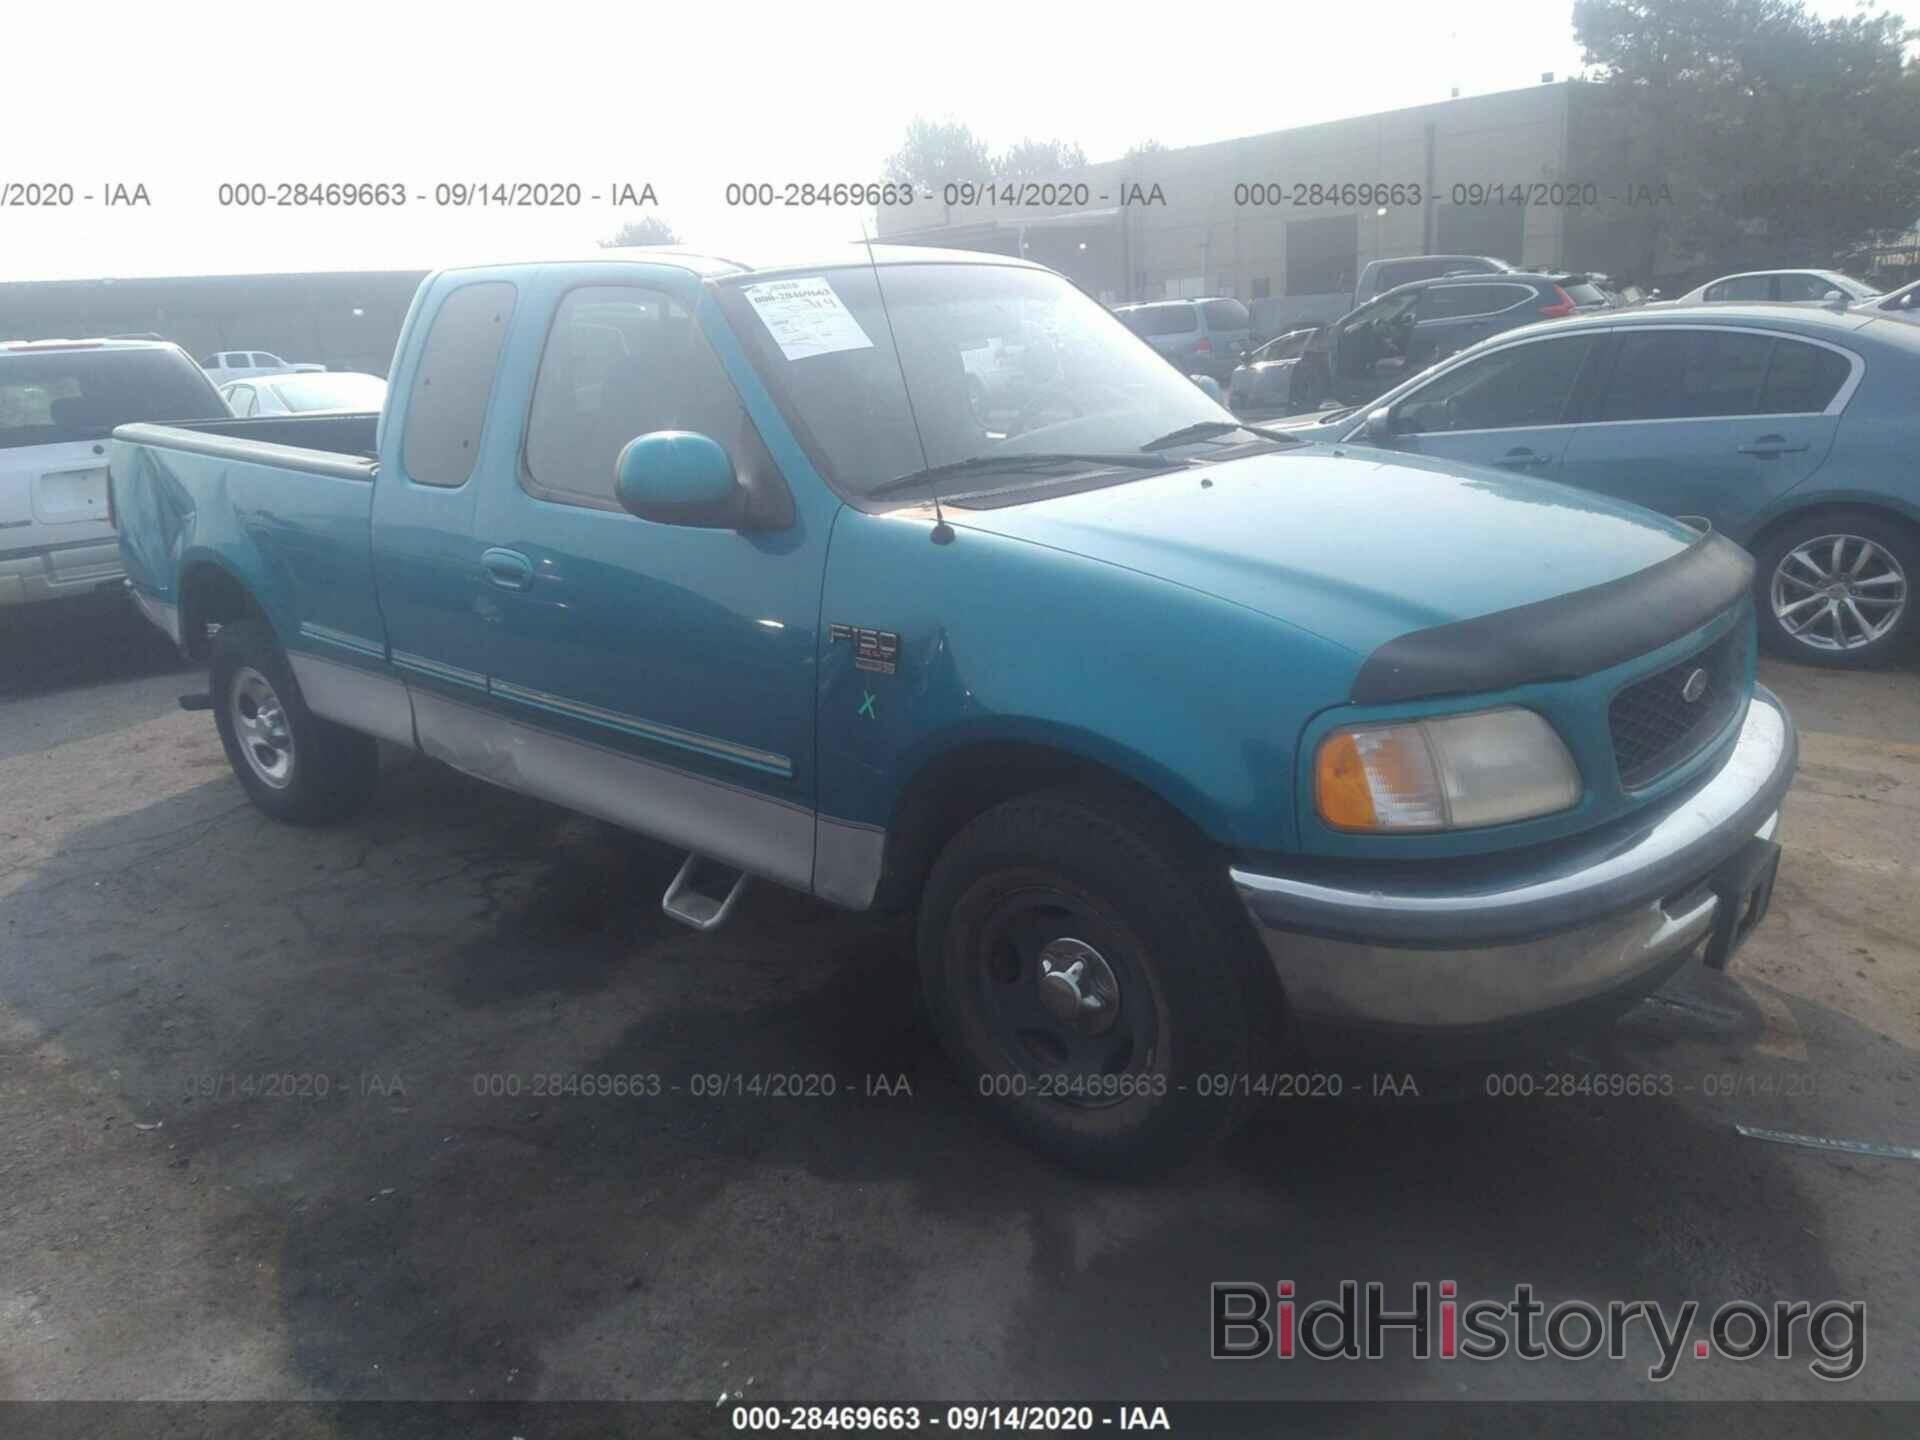 Photo 1FTZX1760WKB75848 - FORD F-150 1998